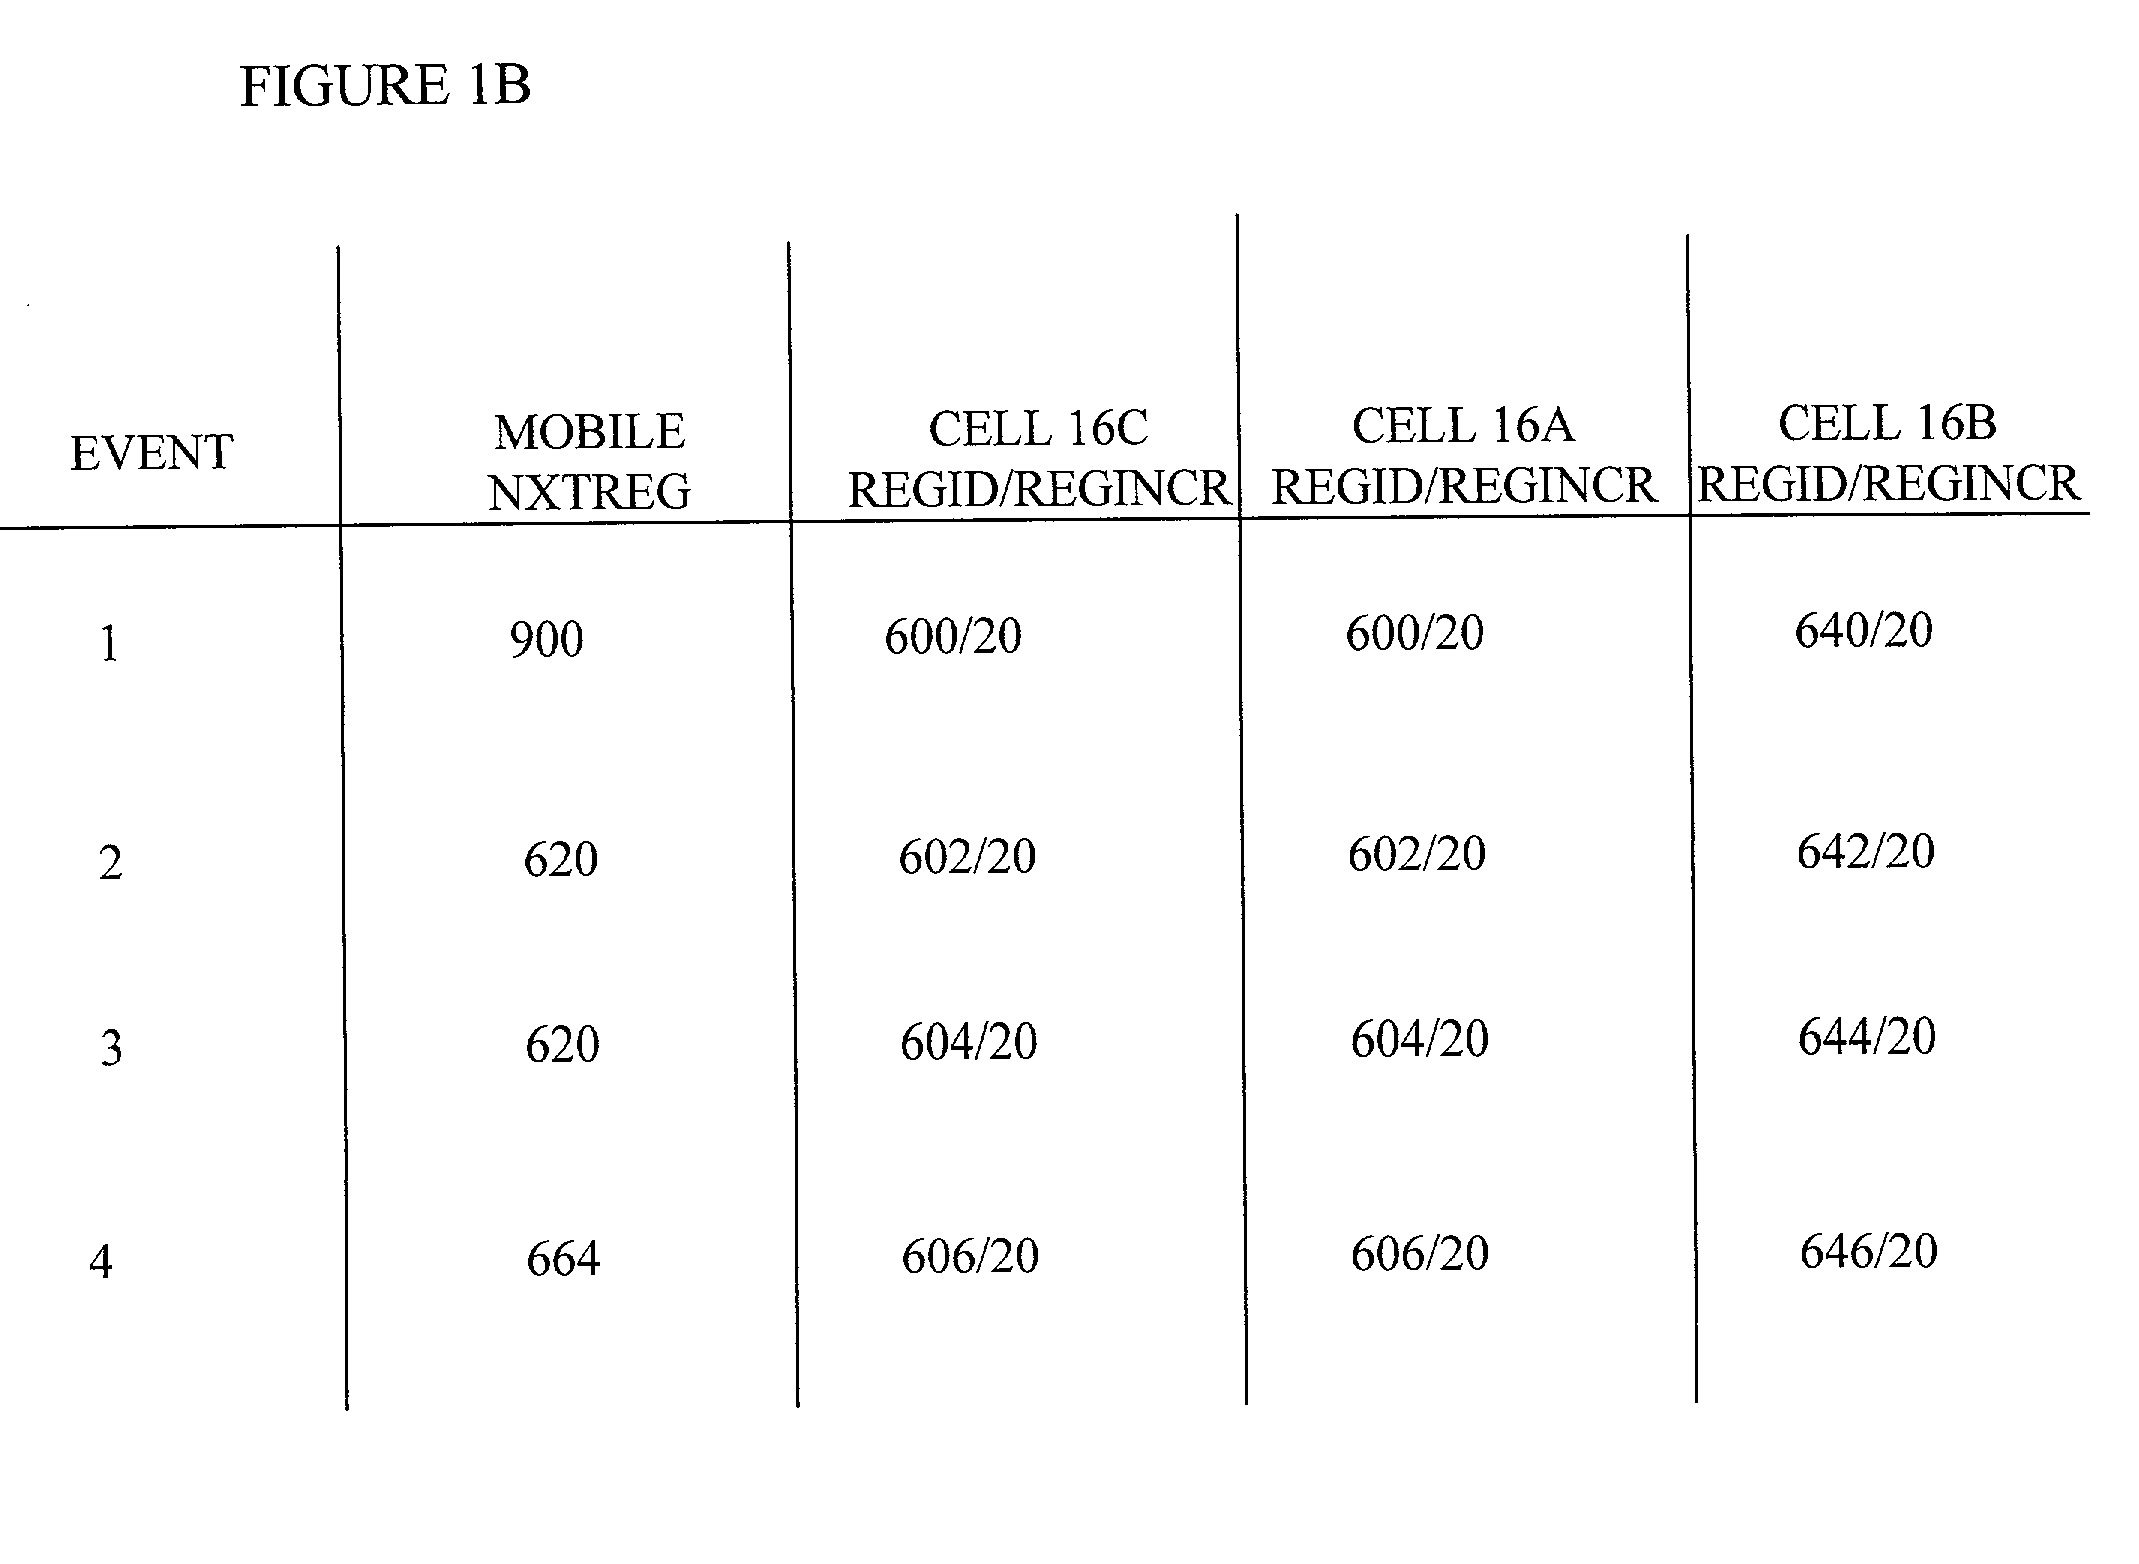 System and method for providing short message targeted advertisements over a wireless communications network